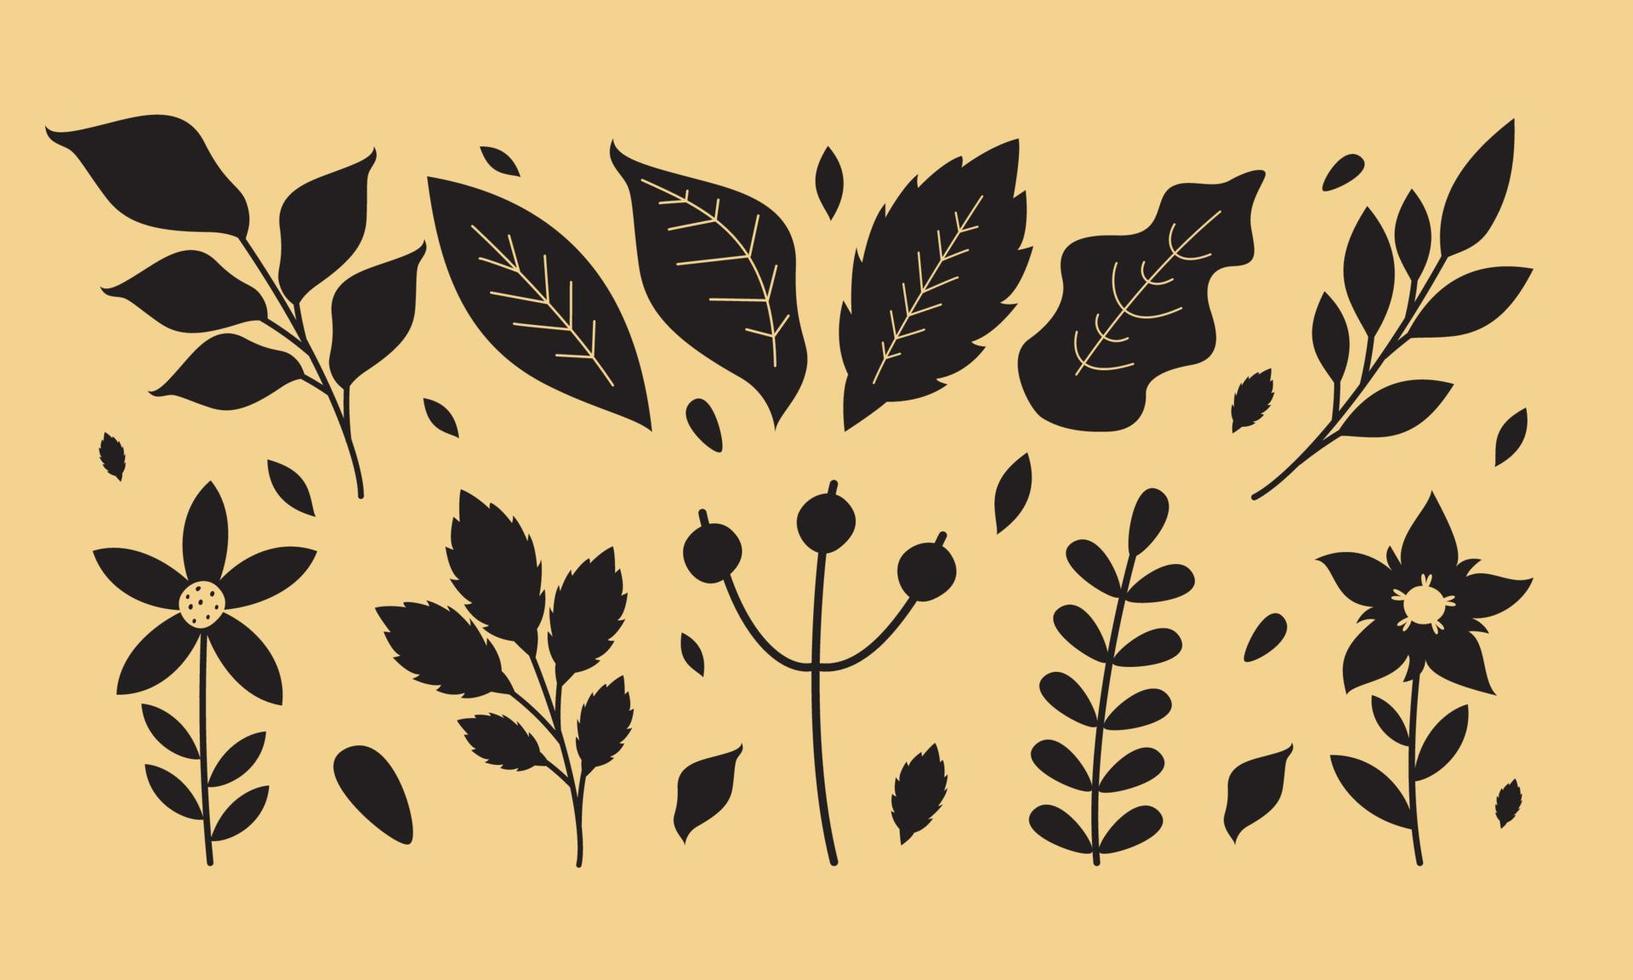 Silhouette Drawing Of Flowers And Plants vector